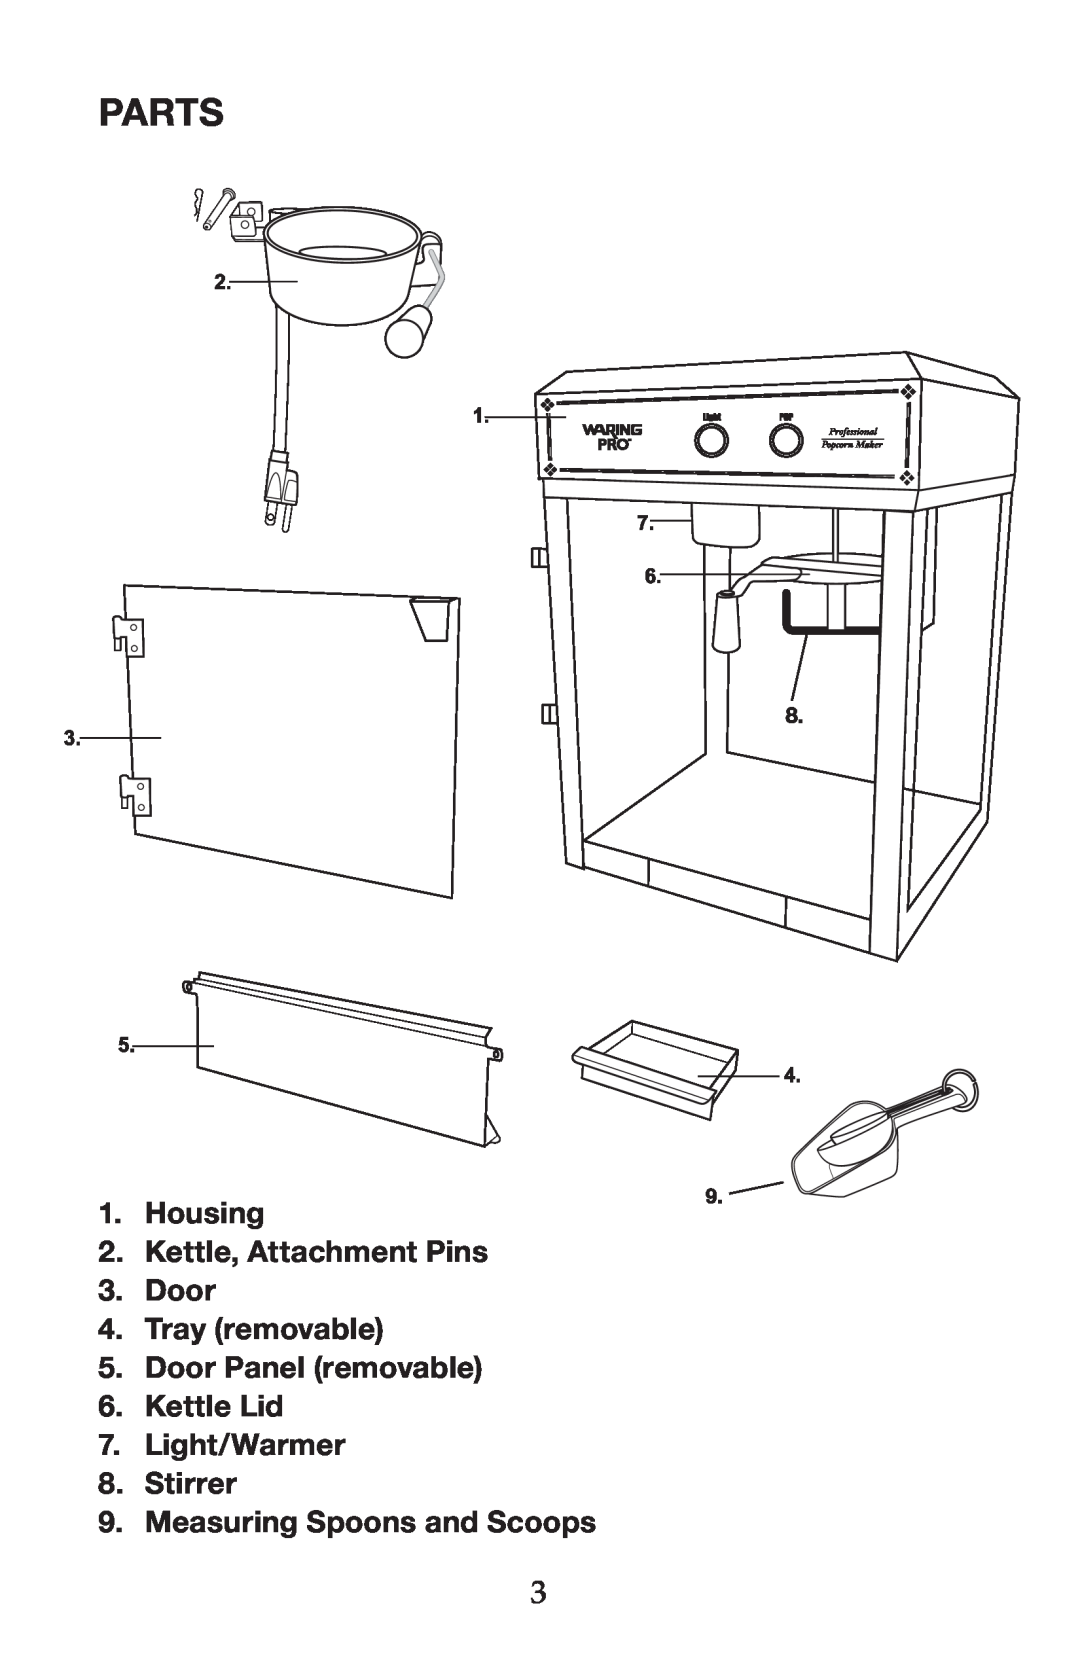 Waring WPM40 manual Parts, Housing 2.Kettle, Attachment Pins 3.Door, Tray removable 5.Door Panel removable 